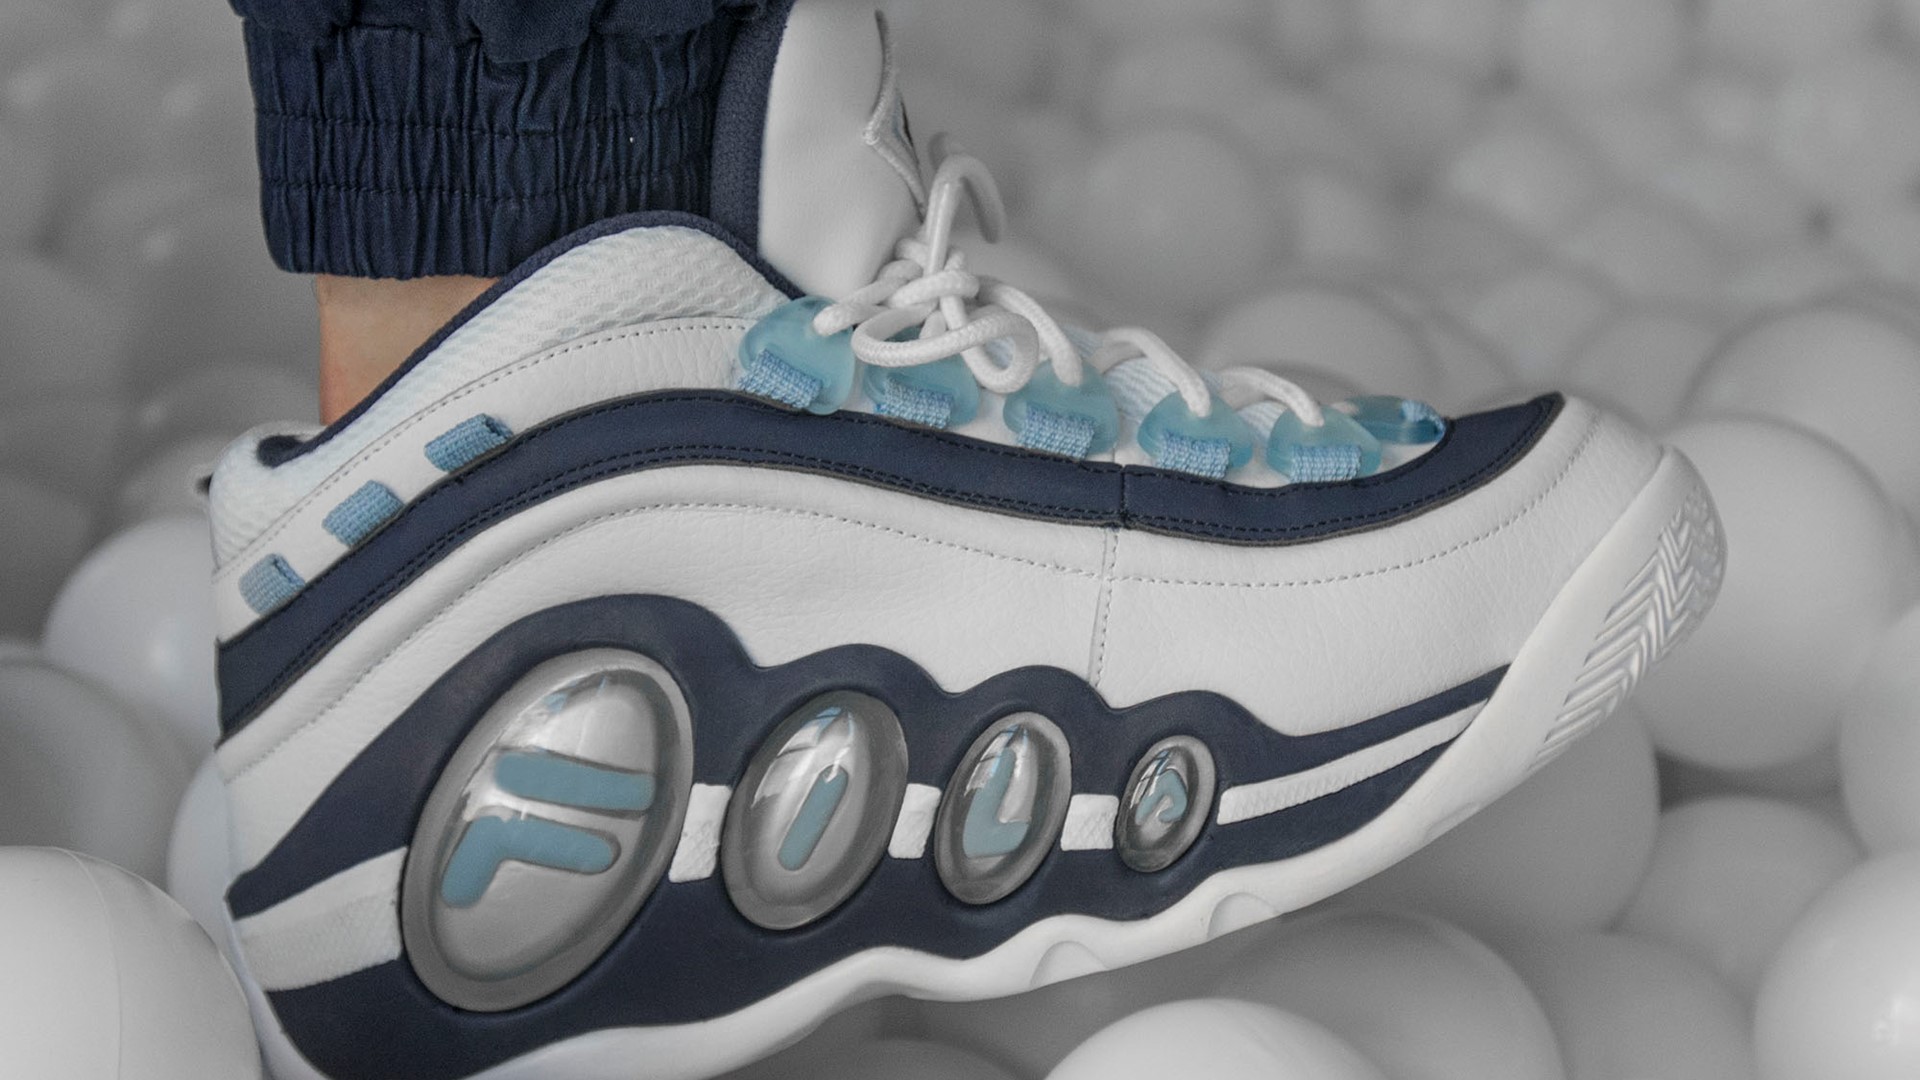 FILA Celebrates the 20th Anniversary of the Bubbles with OG Colorway